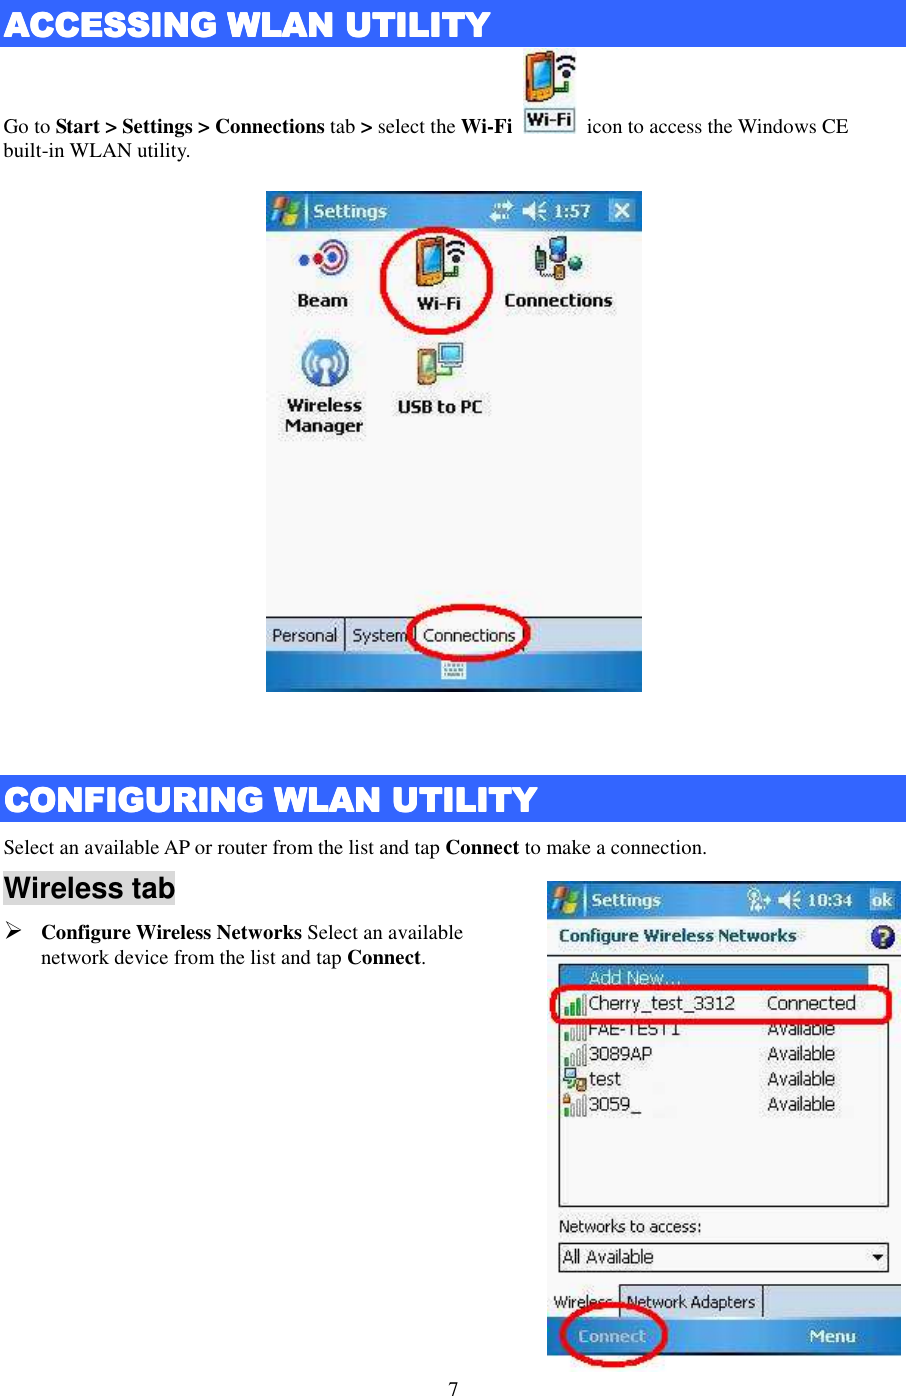   7  ACCESSING ACCESSING ACCESSING ACCESSING WWWWLANLANLANLAN    UUUUTILITYTILITYTILITYTILITY    Go to Start &gt; Settings &gt; Connections tab &gt; select the Wi-Fi    icon to access the Windows CE built-in WLAN utility.   CCCCONFIGURING ONFIGURING ONFIGURING ONFIGURING WLAN UWLAN UWLAN UWLAN UTILITYTILITYTILITYTILITY    Select an available AP or router from the list and tap Connect to make a connection. Wireless tab  Configure Wireless Networks Select an available network device from the list and tap Connect.       